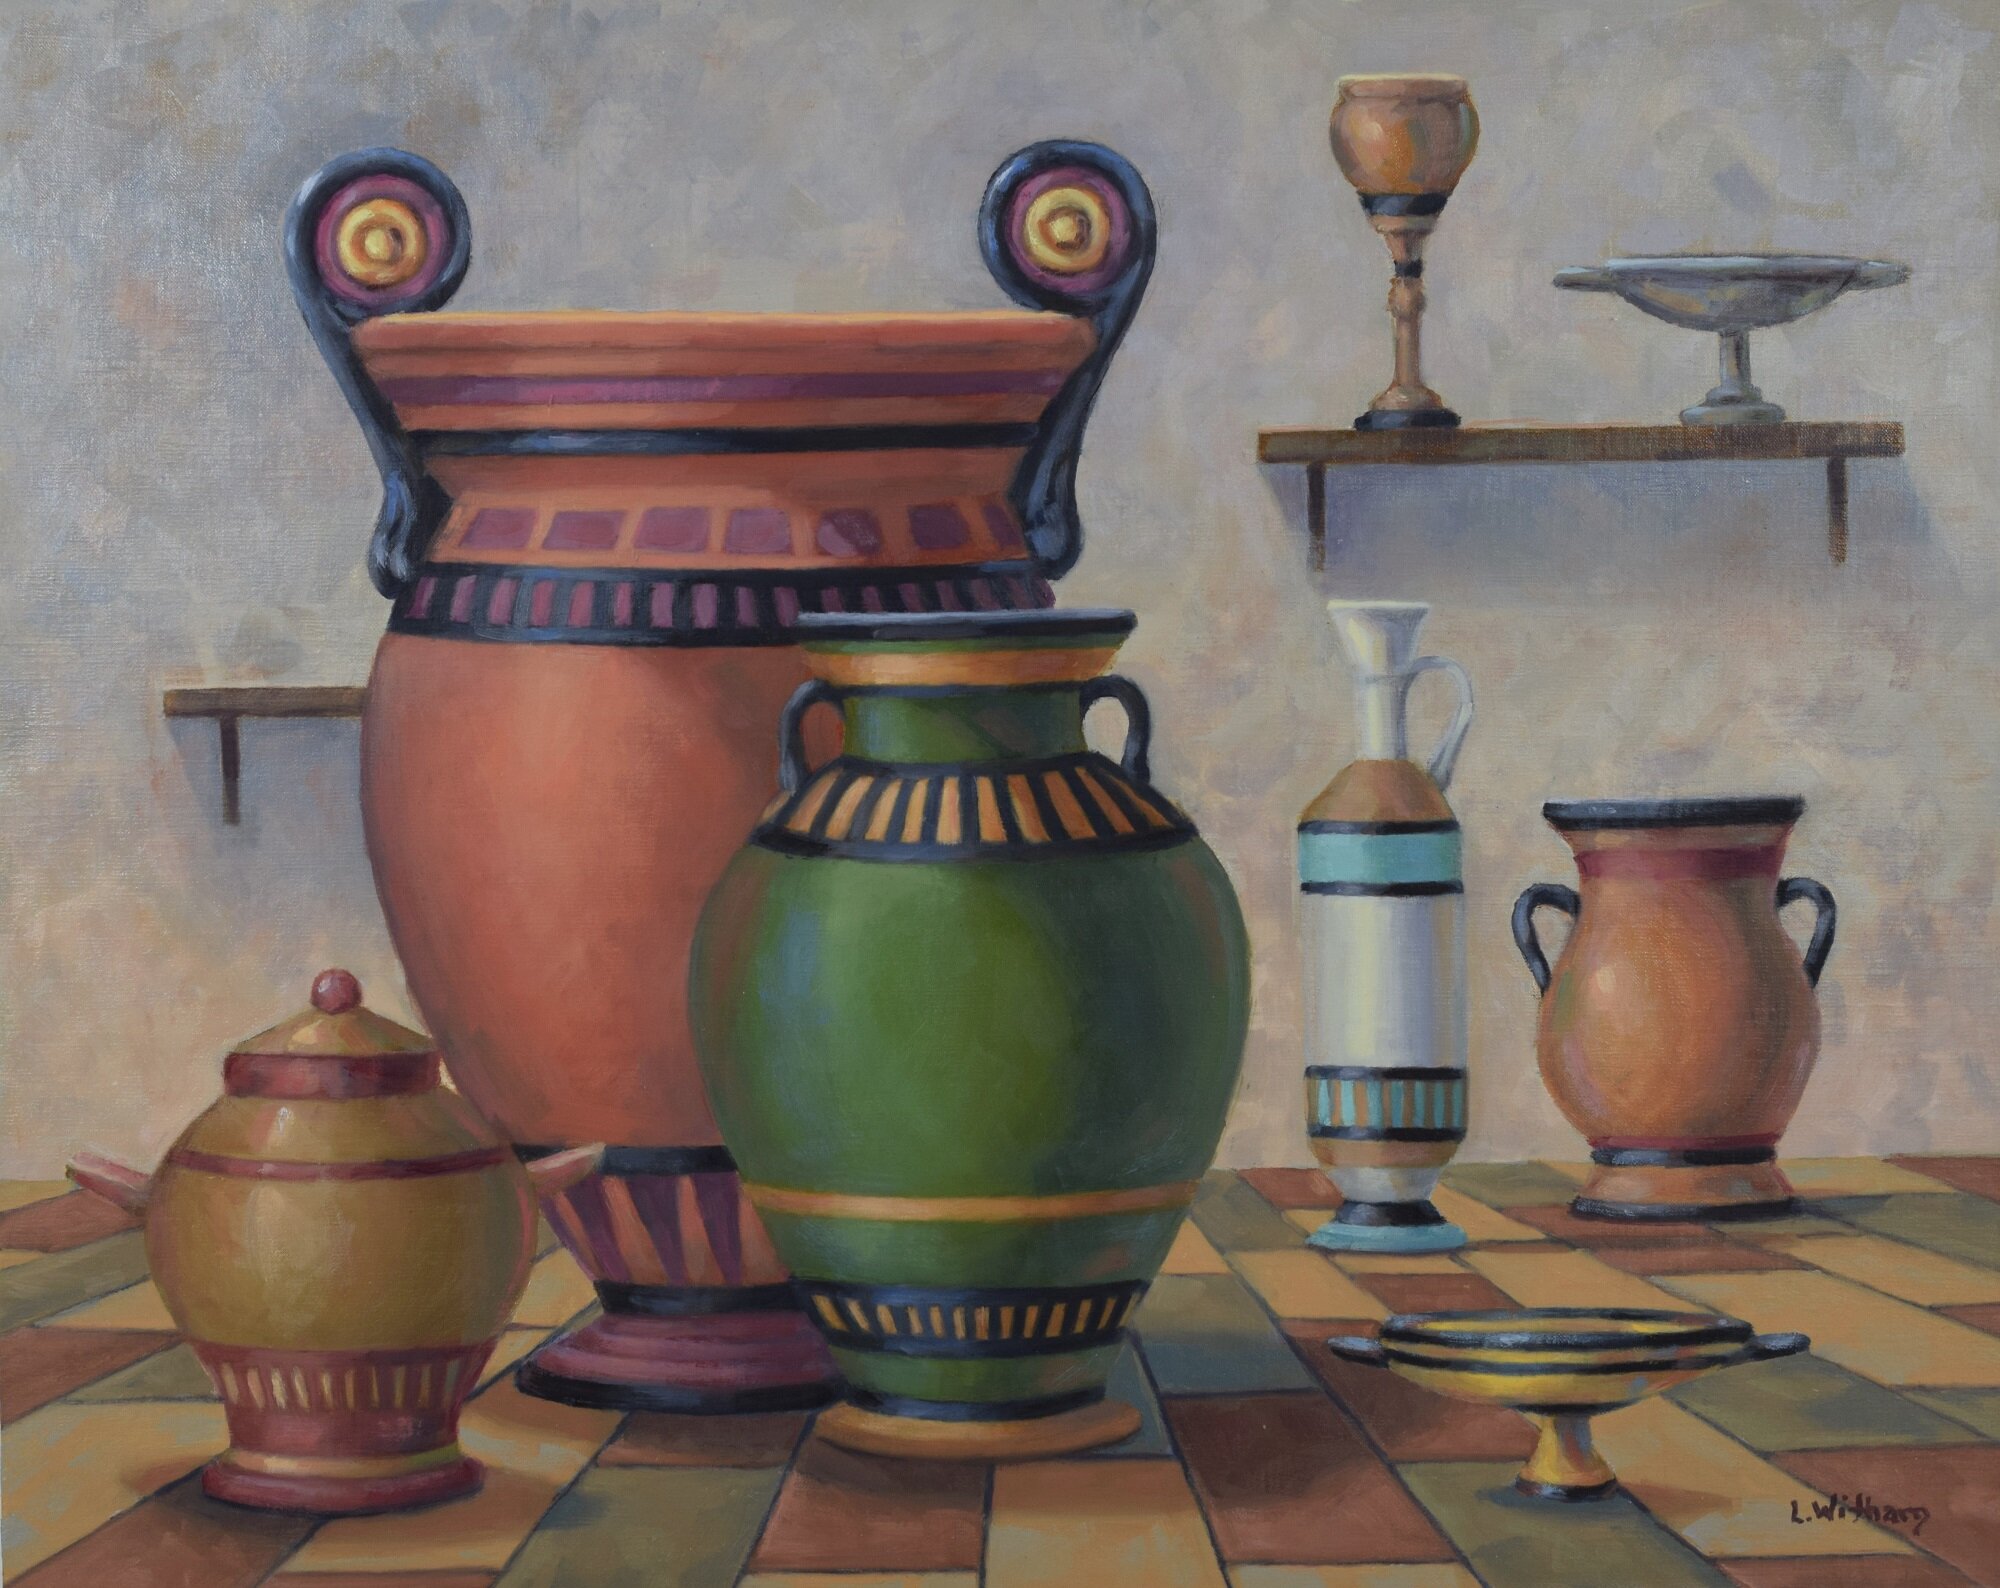 Ode to Grecian Urns, Oil on linen, 16x20